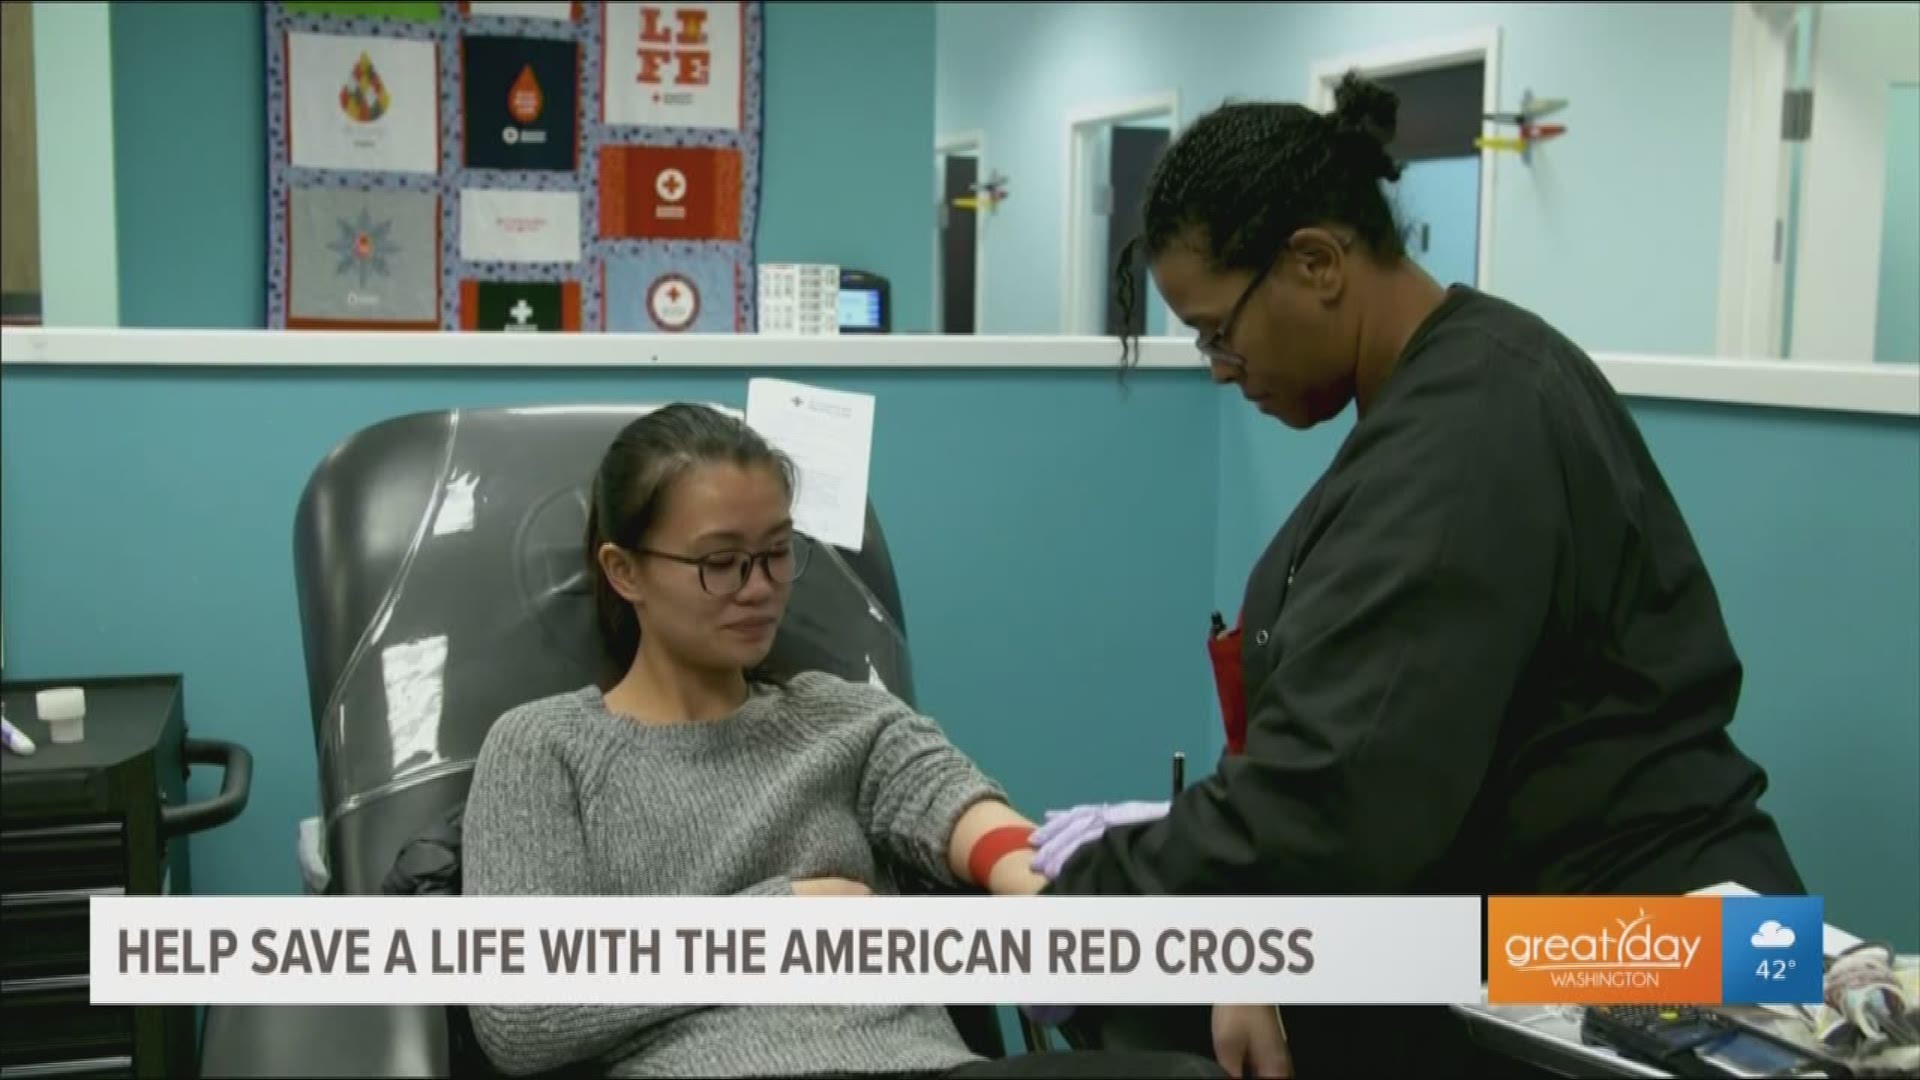 Gail McGovern, Pres. & CEO of The American Red Cross, shares how giving blood can directly help cancer patients. This segment is sponsored by The American Red Cross.